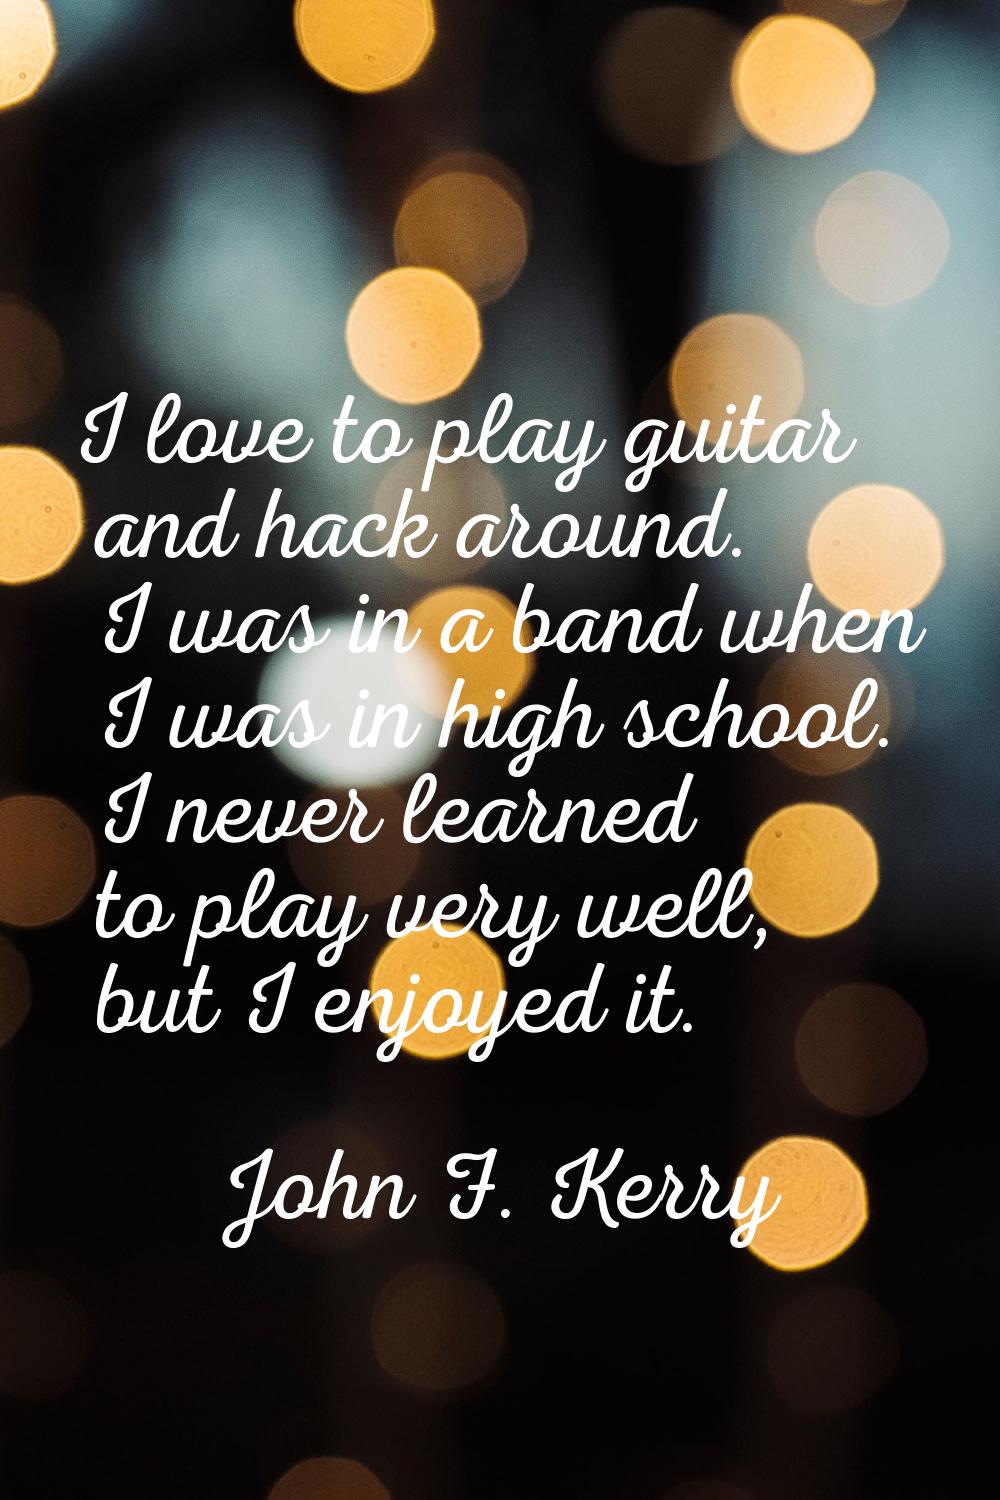 I love to play guitar and hack around. I was in a band when I was in high school. I never learned t